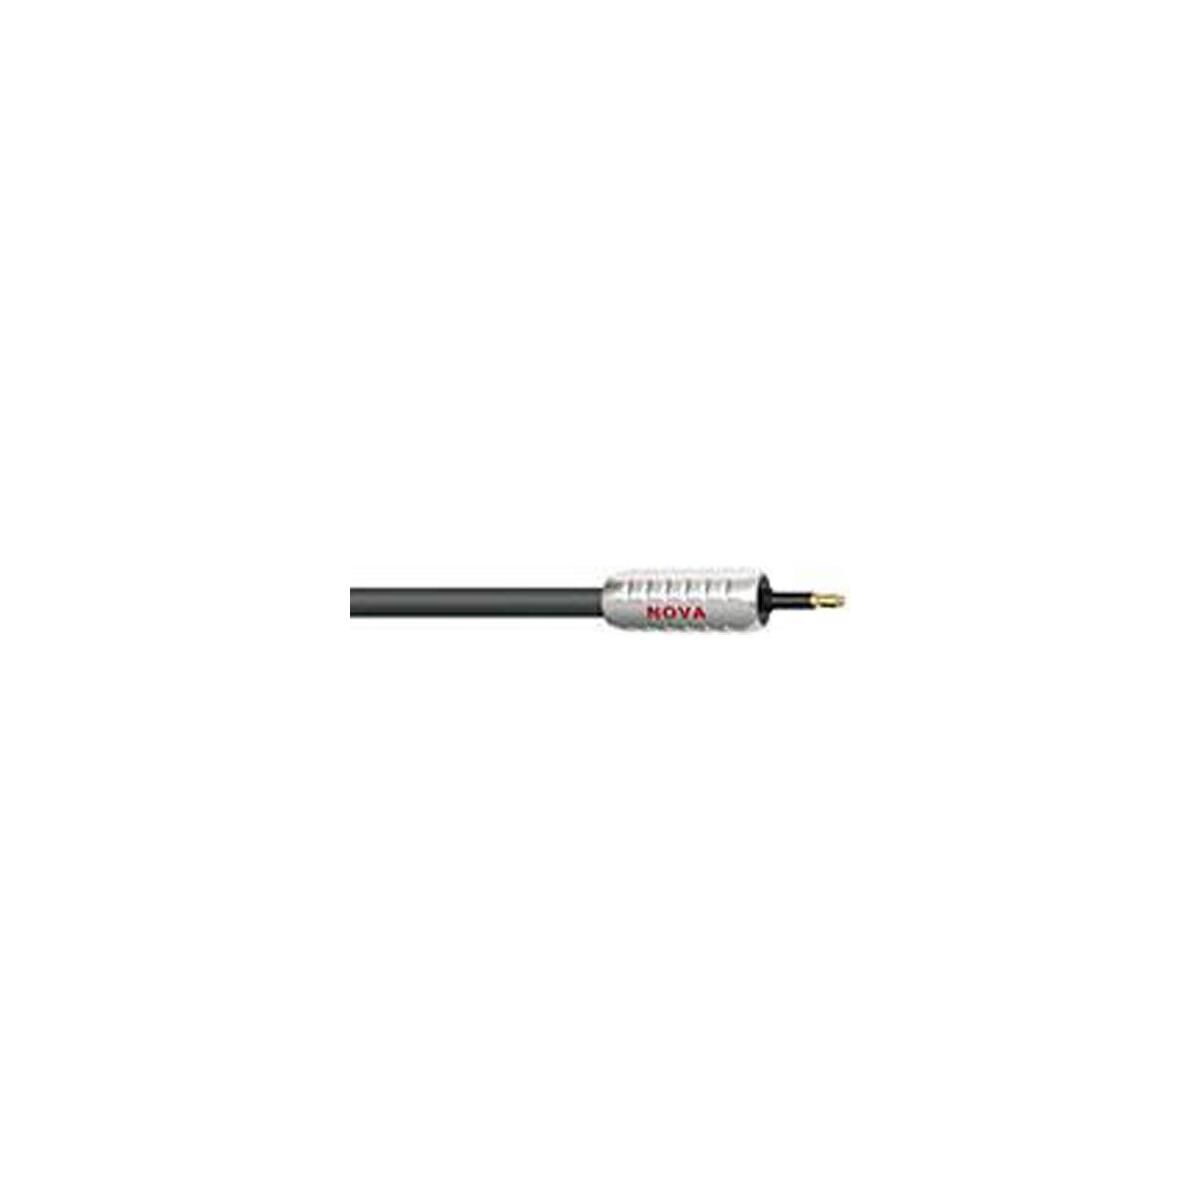 WireWorld Nova Toslink to 3.5mm Connector (NMO) Digital Audio Cable, 6.5' (2.0m)